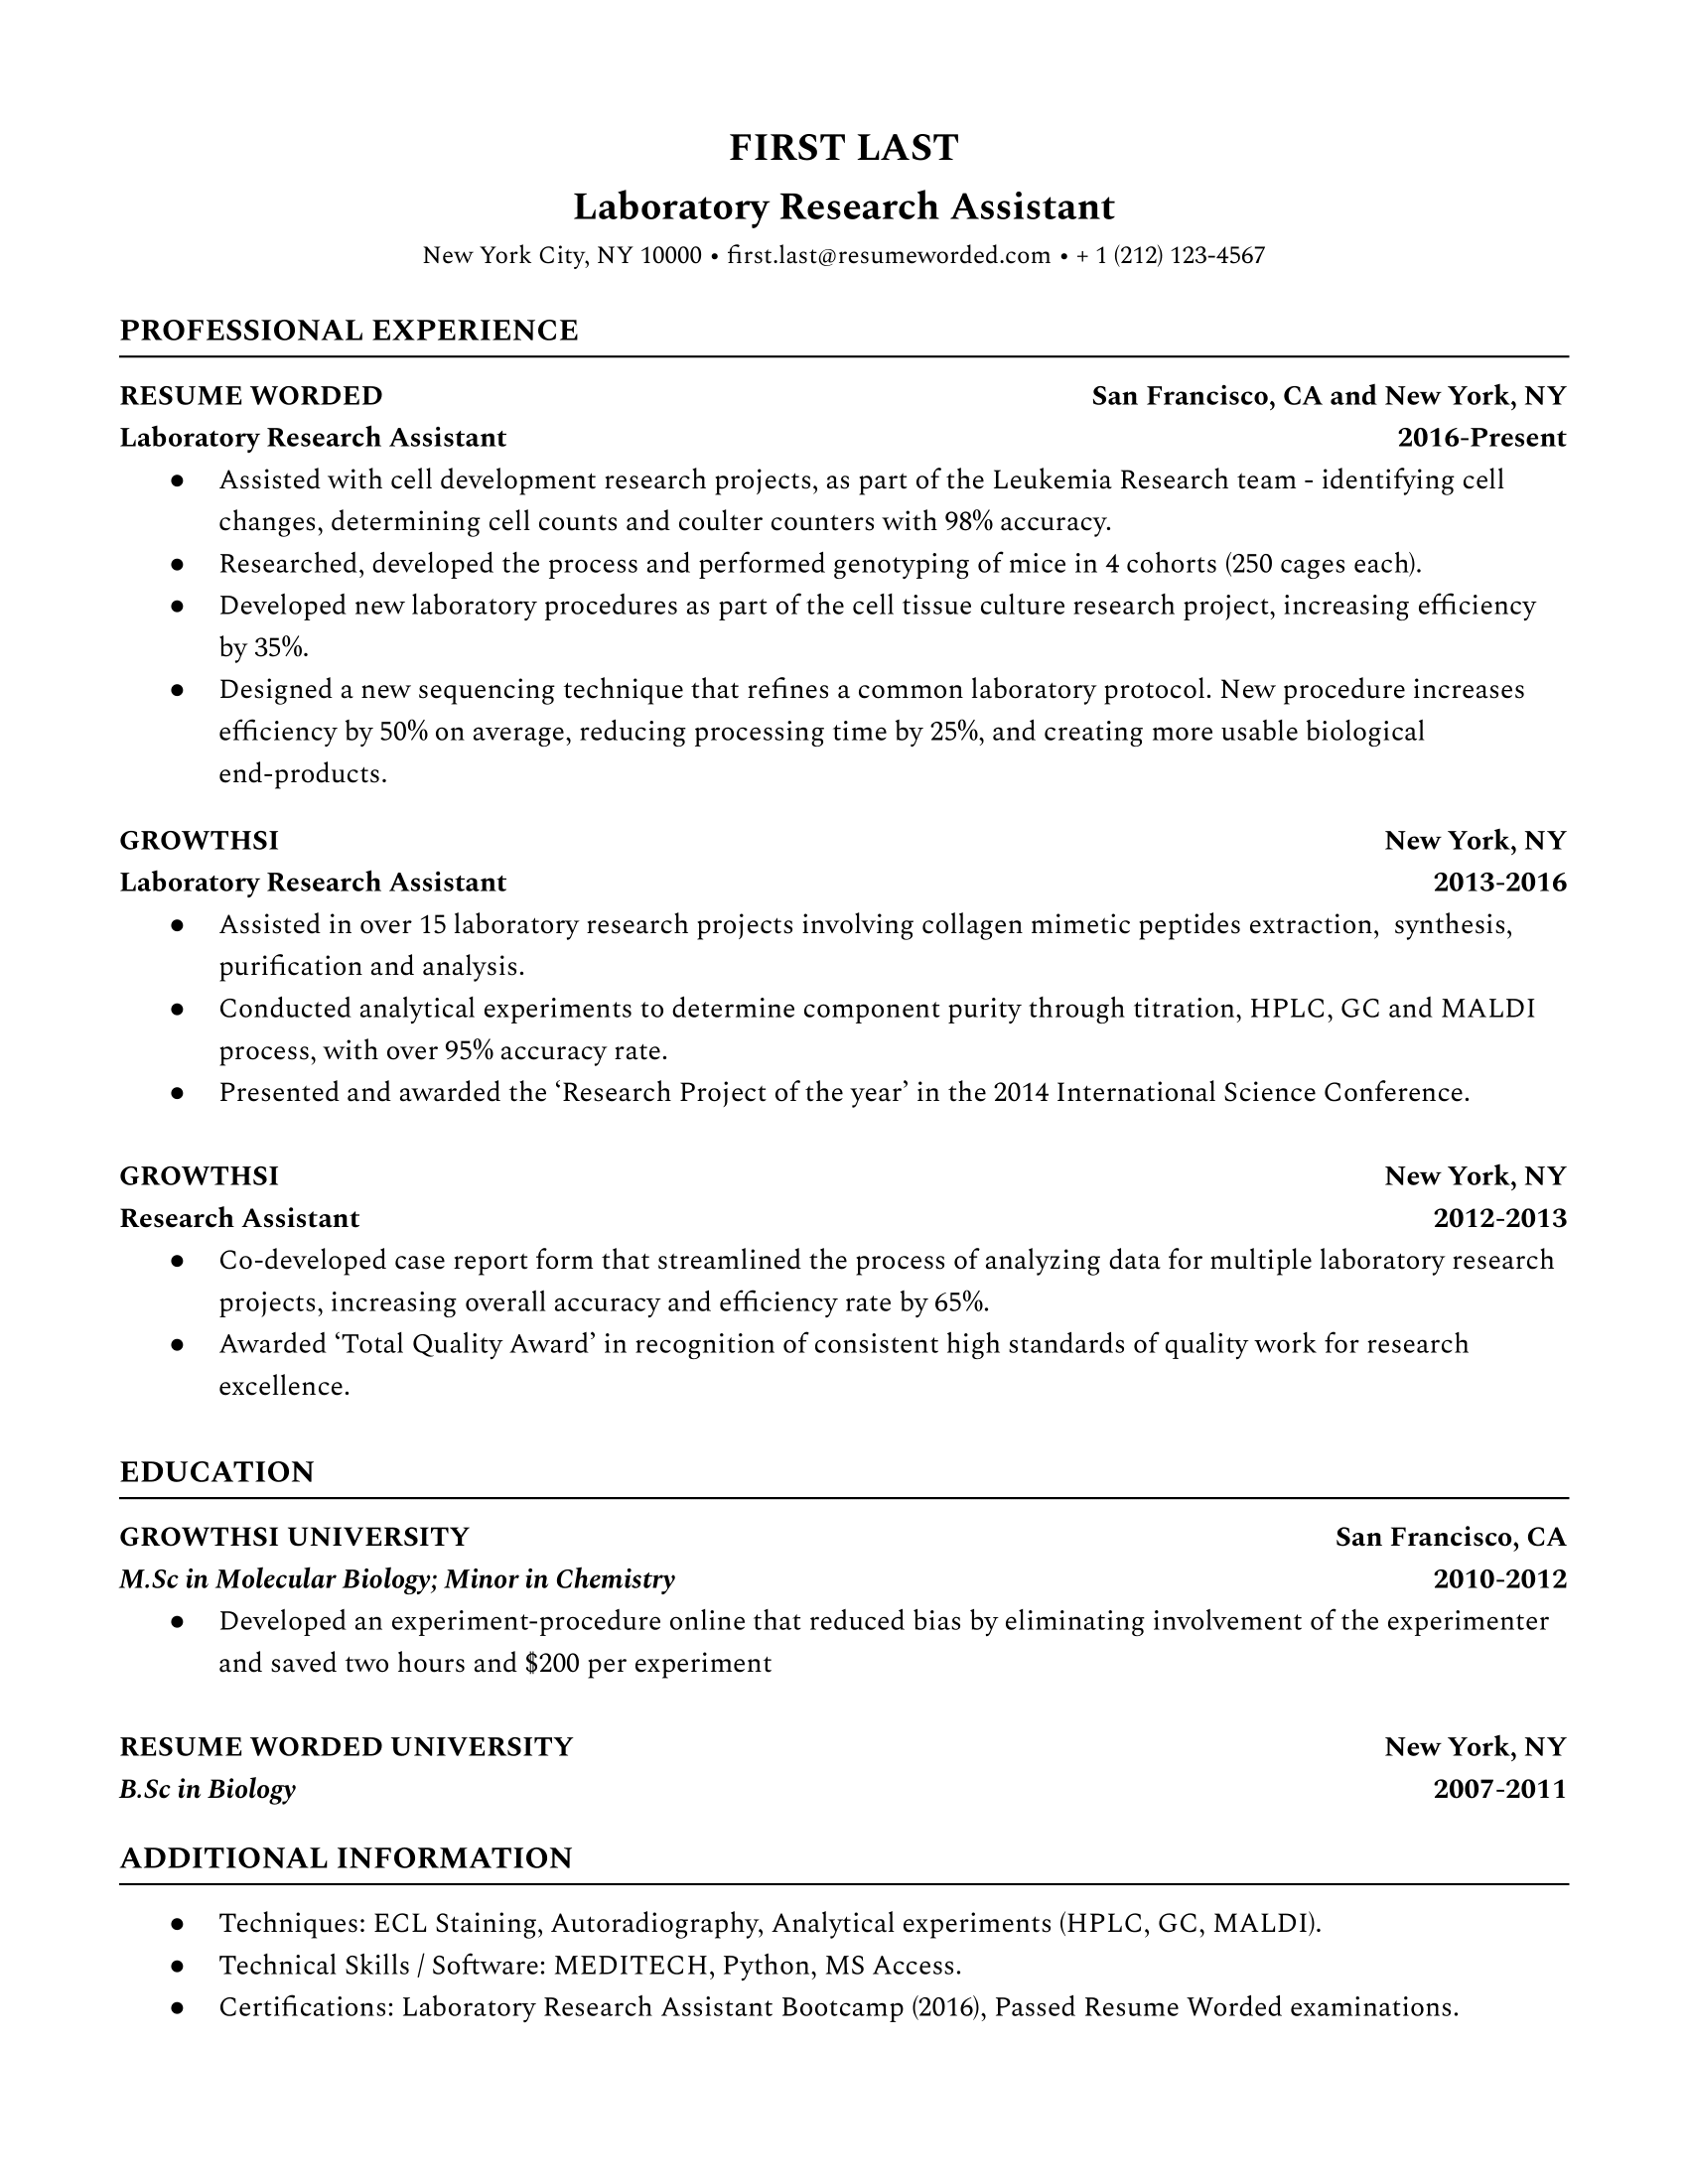 A resume for a Laboratory Research Assistant highlighting specific lab and computational skills.